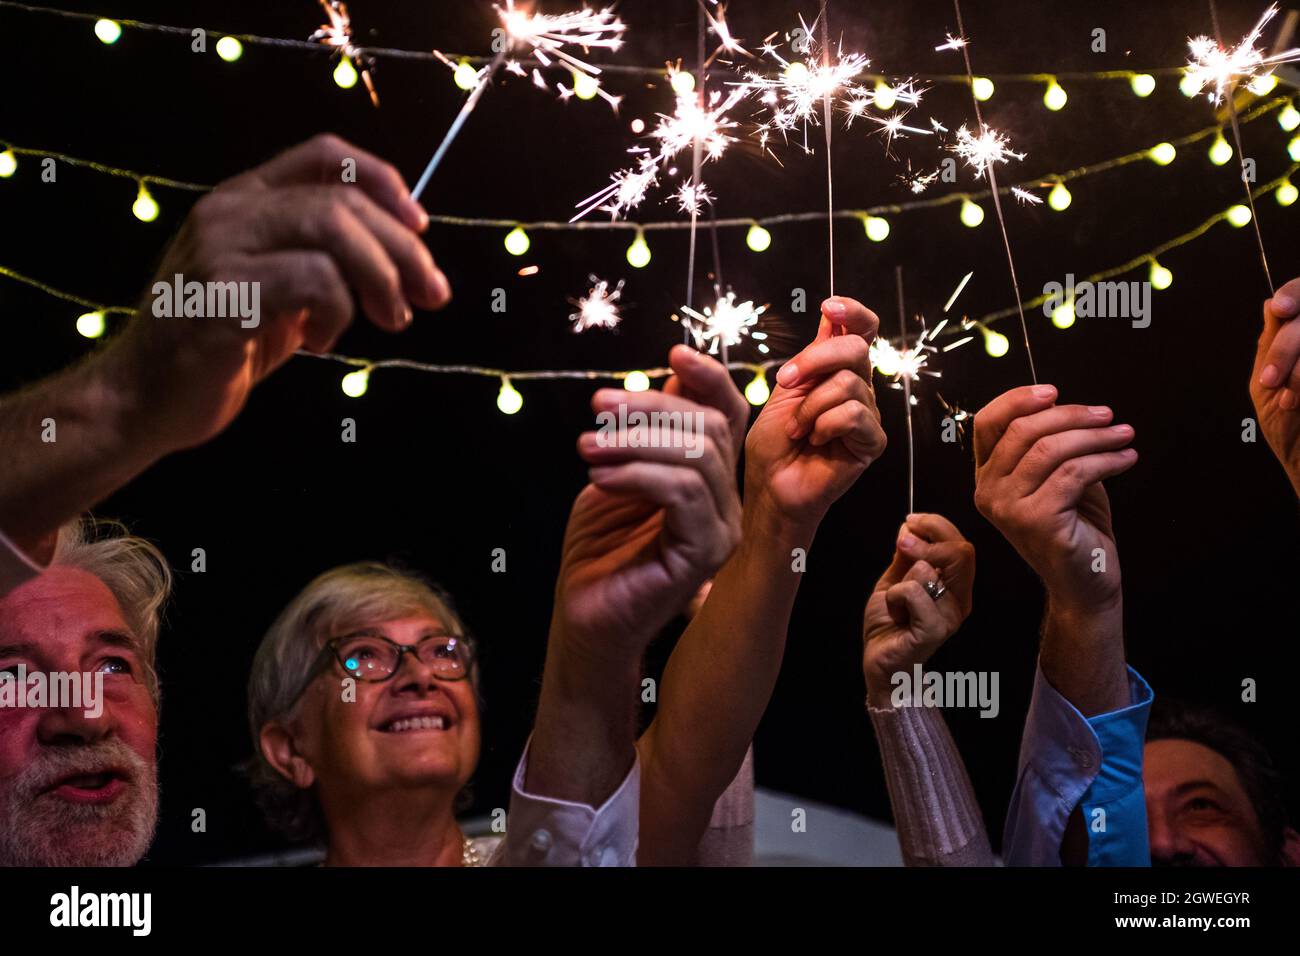 Low Angle View Of People Holding Illuminated Sparklers Stock Photo